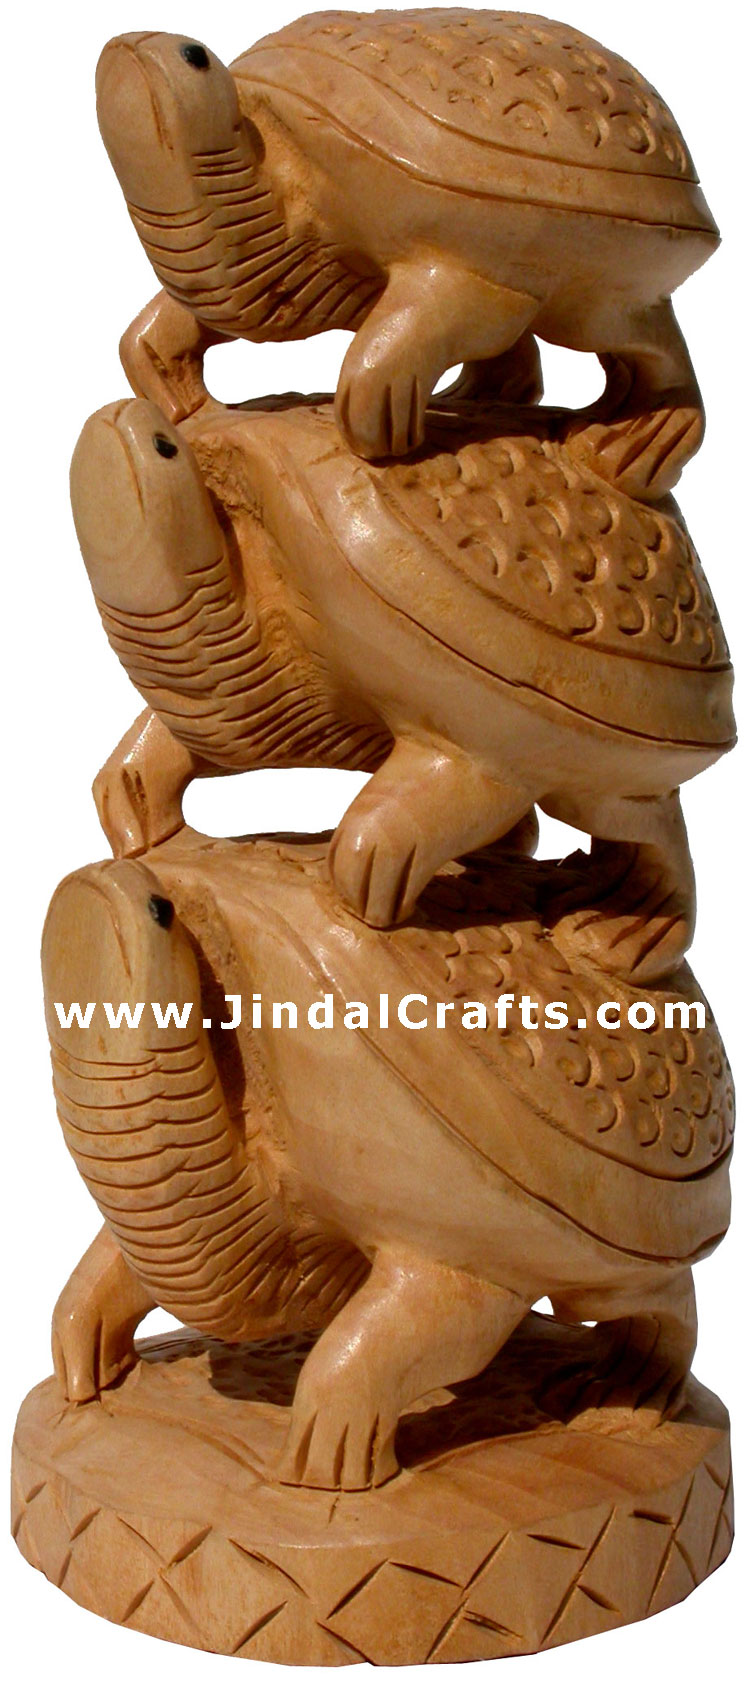 Wooden Turtle Tower - Handcarved Animal Figures Indian